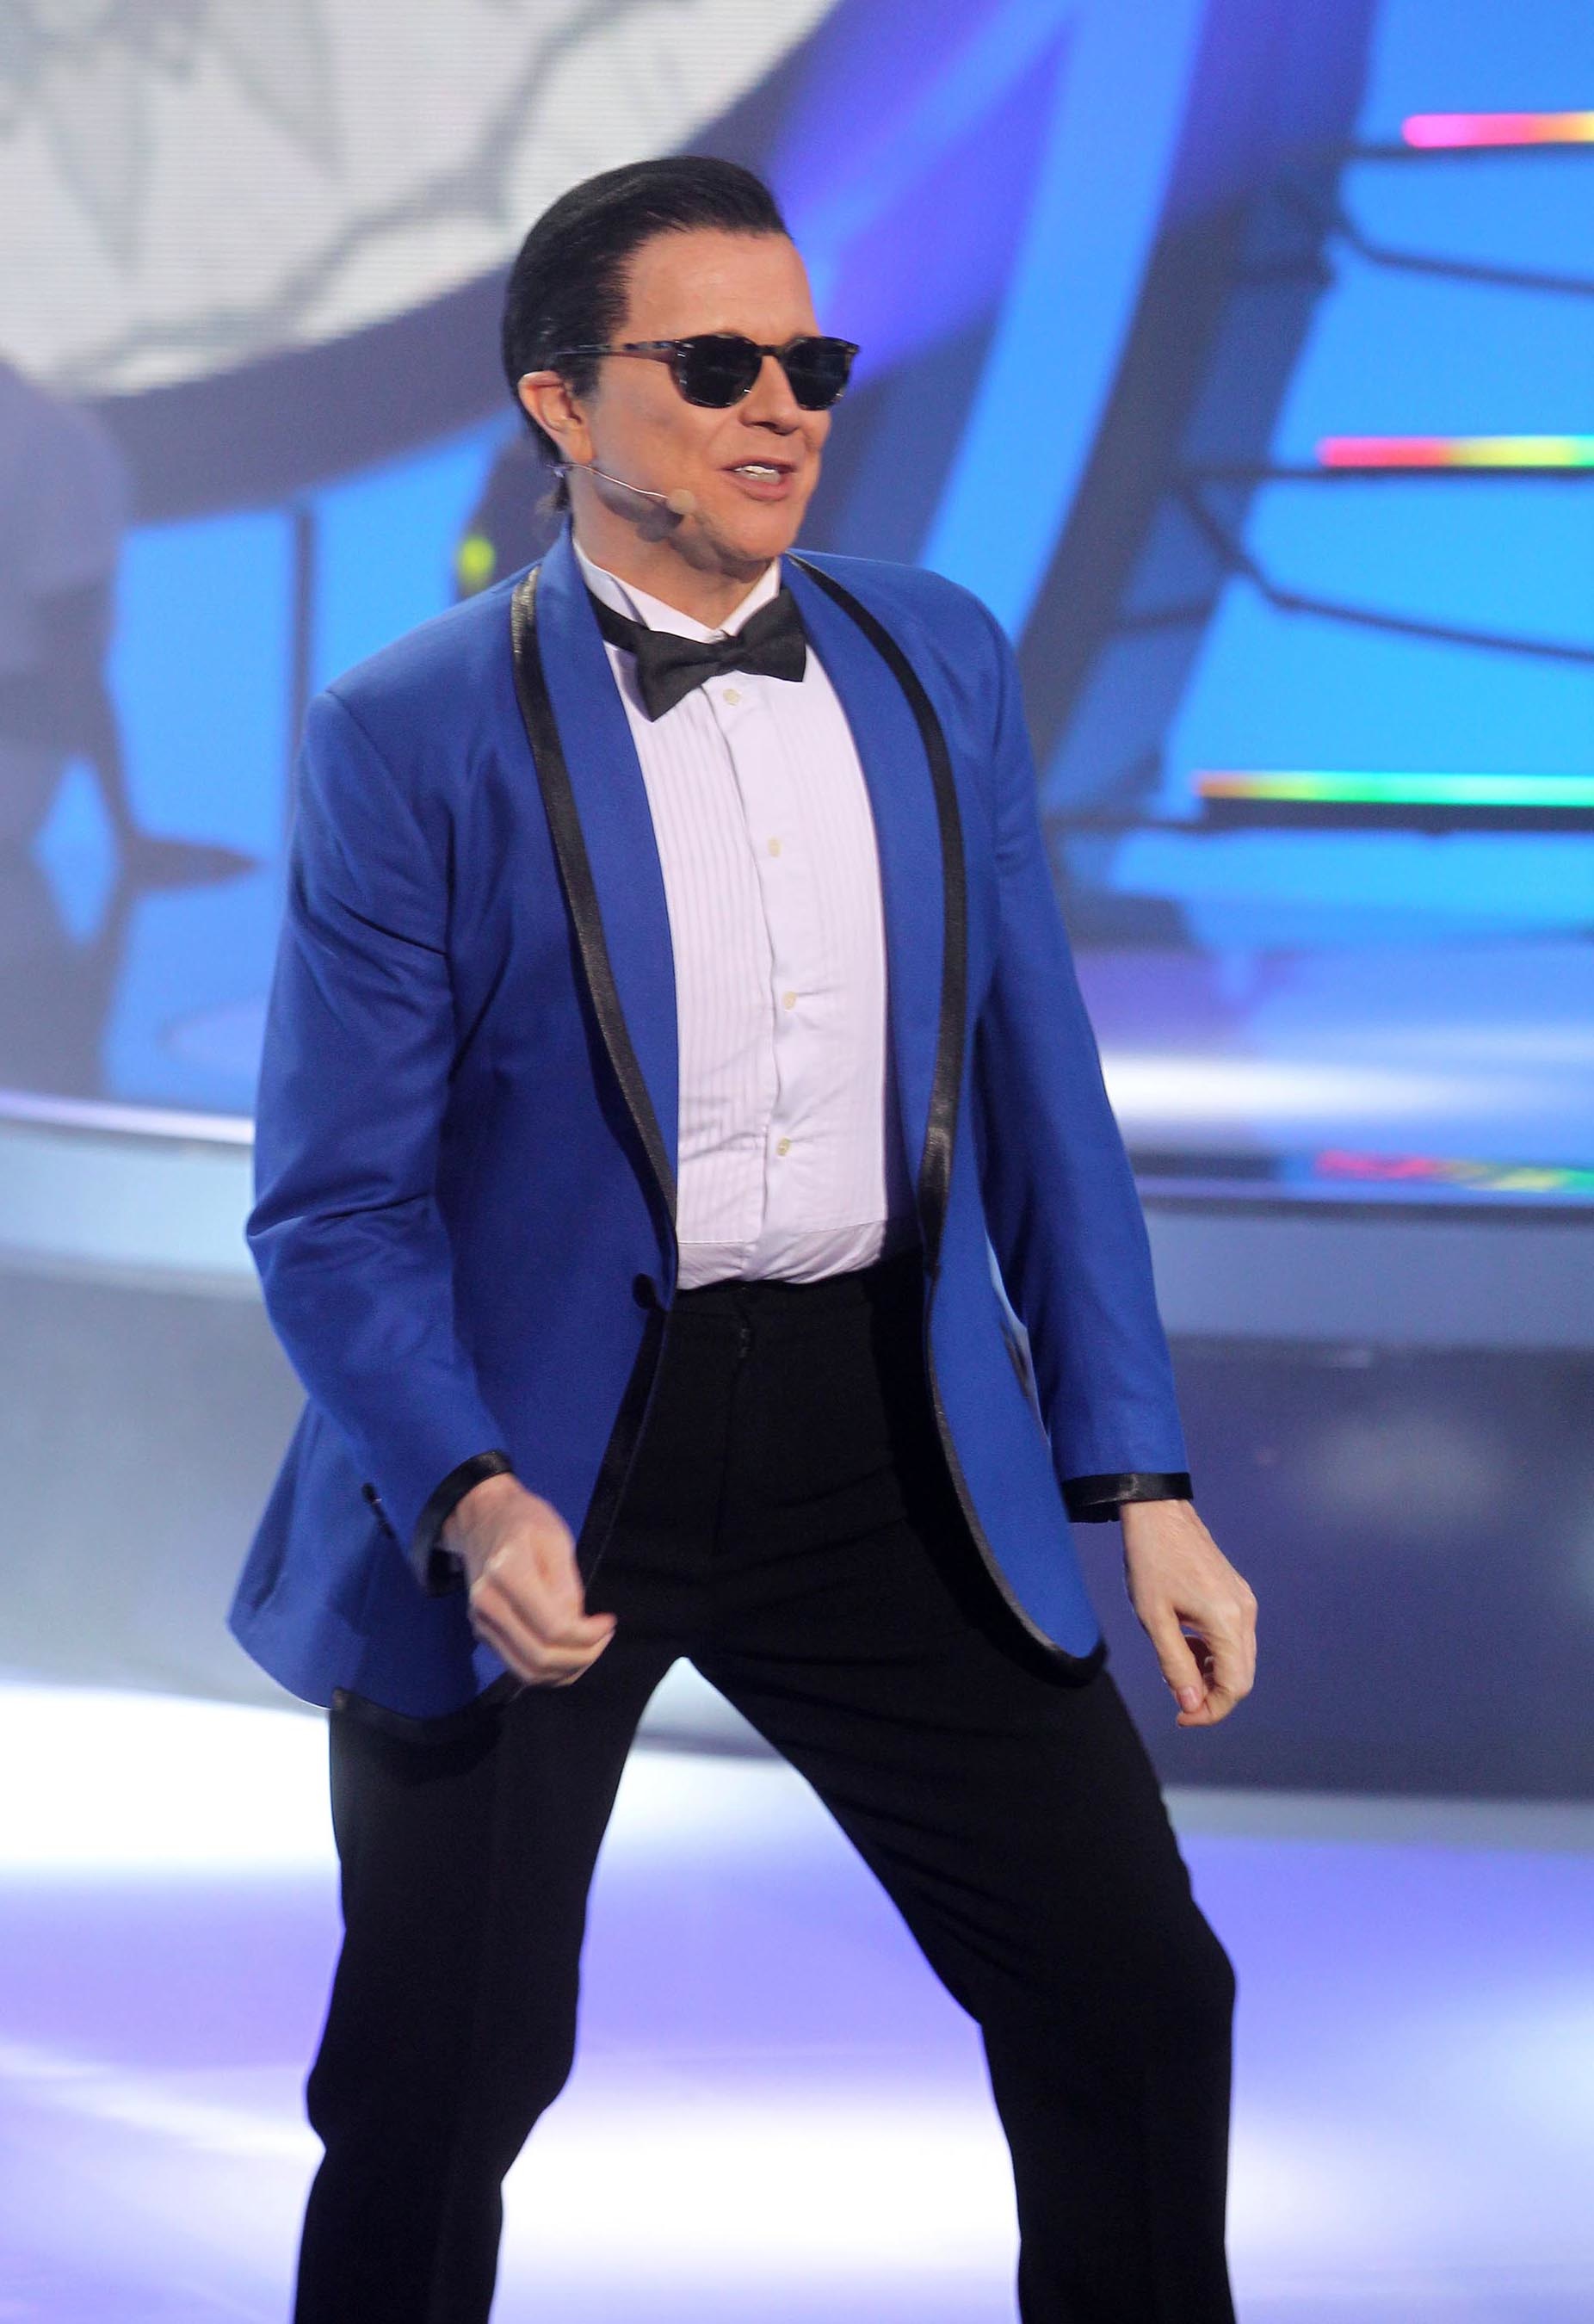 Impersonating PSY on a talent show.